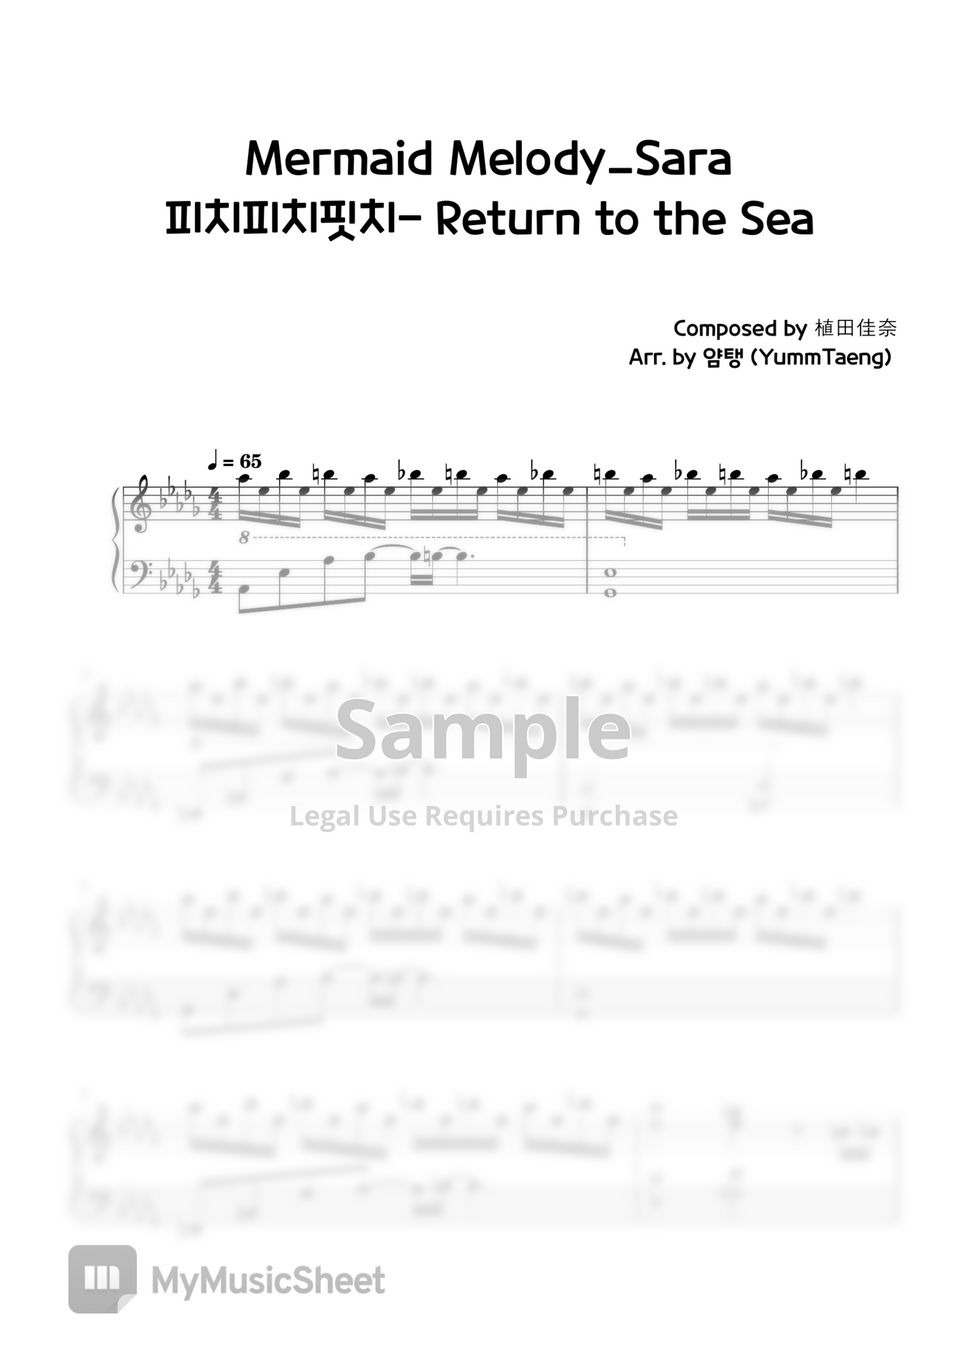 Mermaid Melody OST - Return to the Sea by YummTaeng